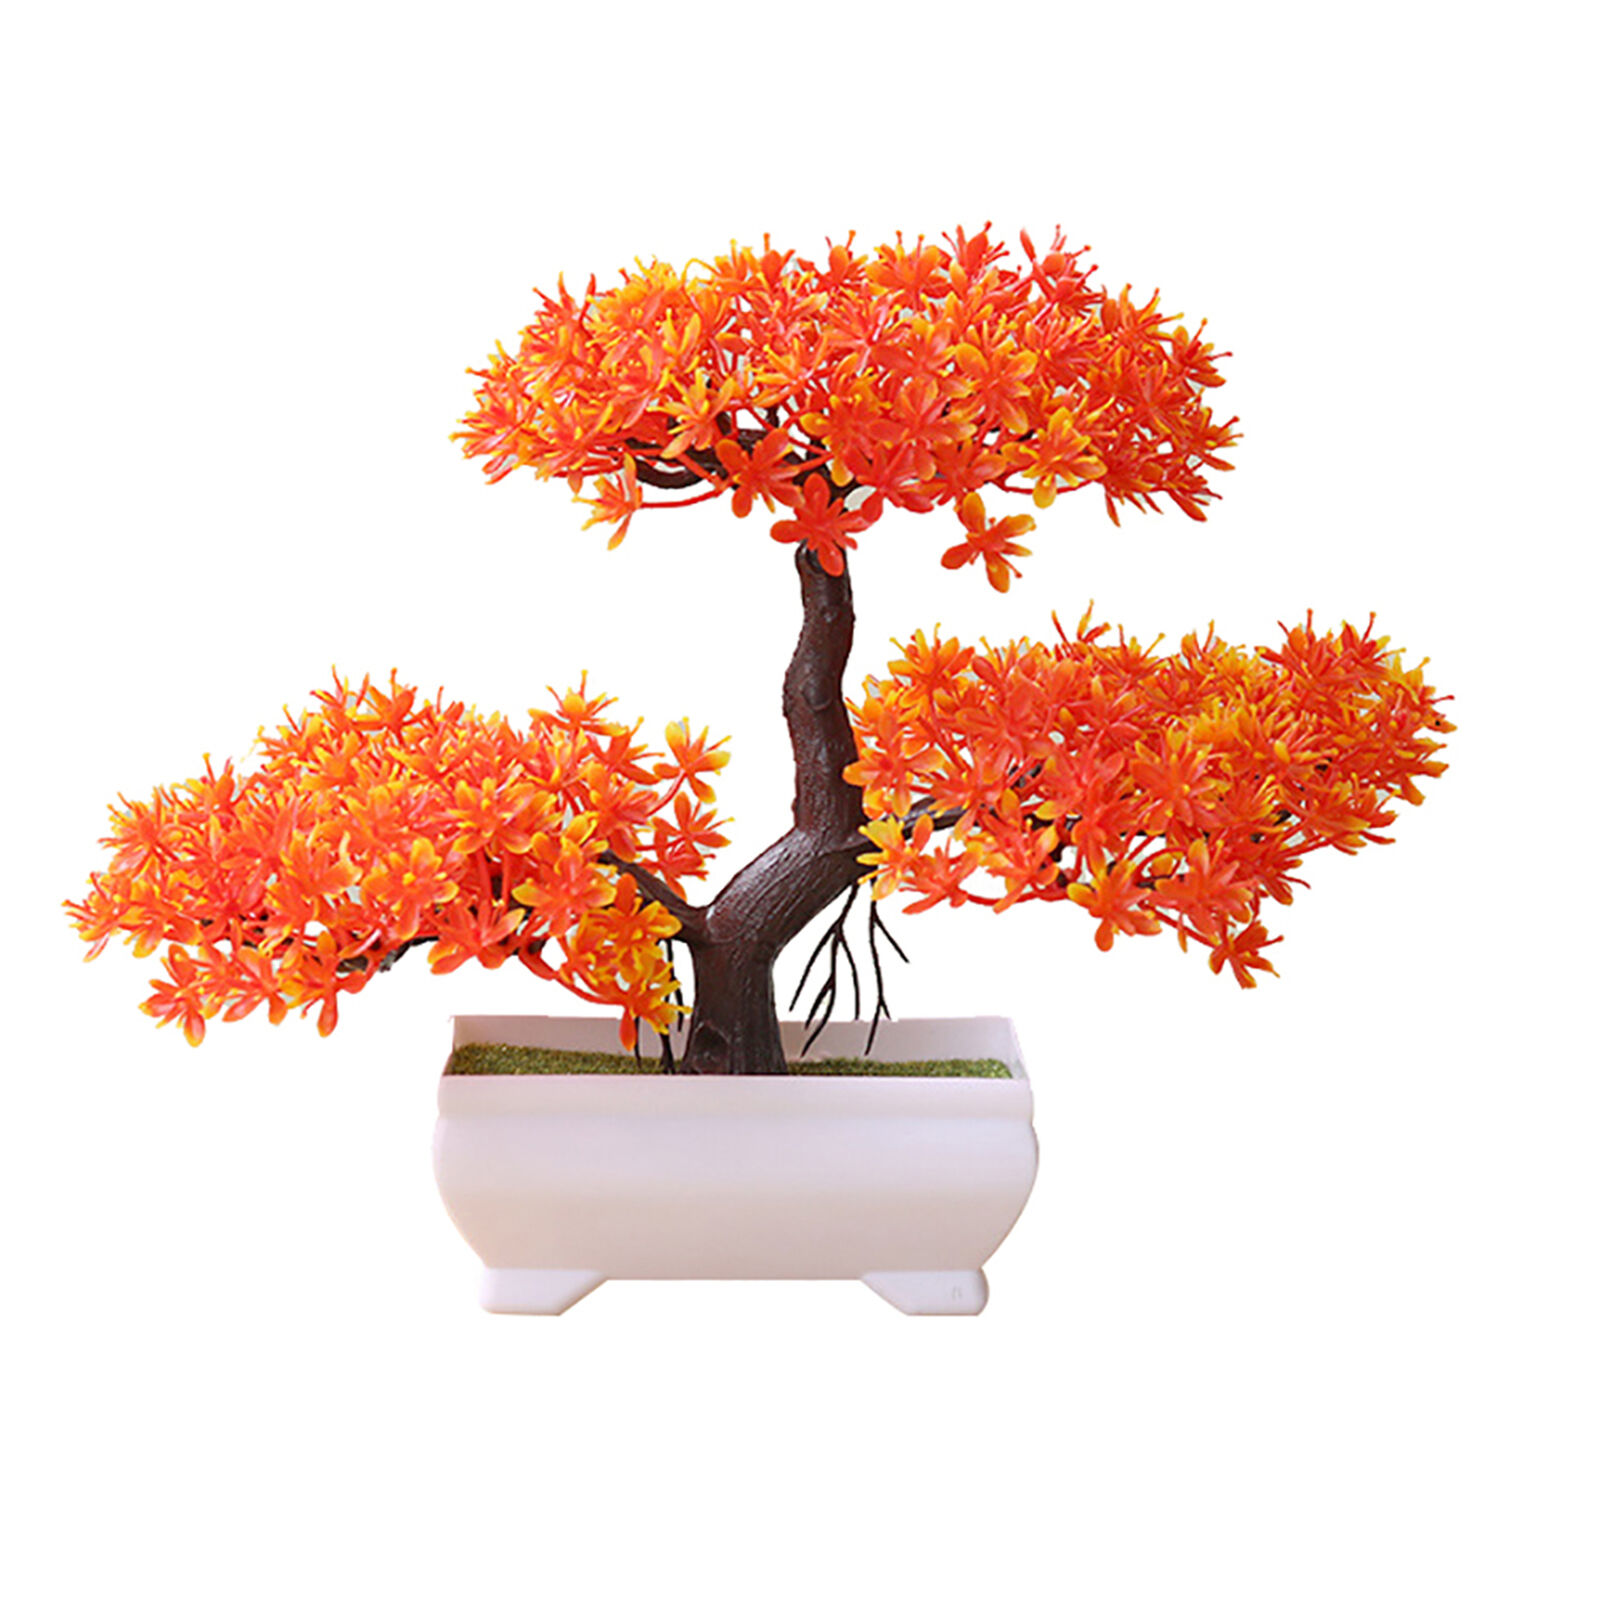 Pine Bonsai Small Tree Artificial Plants Fake Flowers Potted Ornament Home Decor